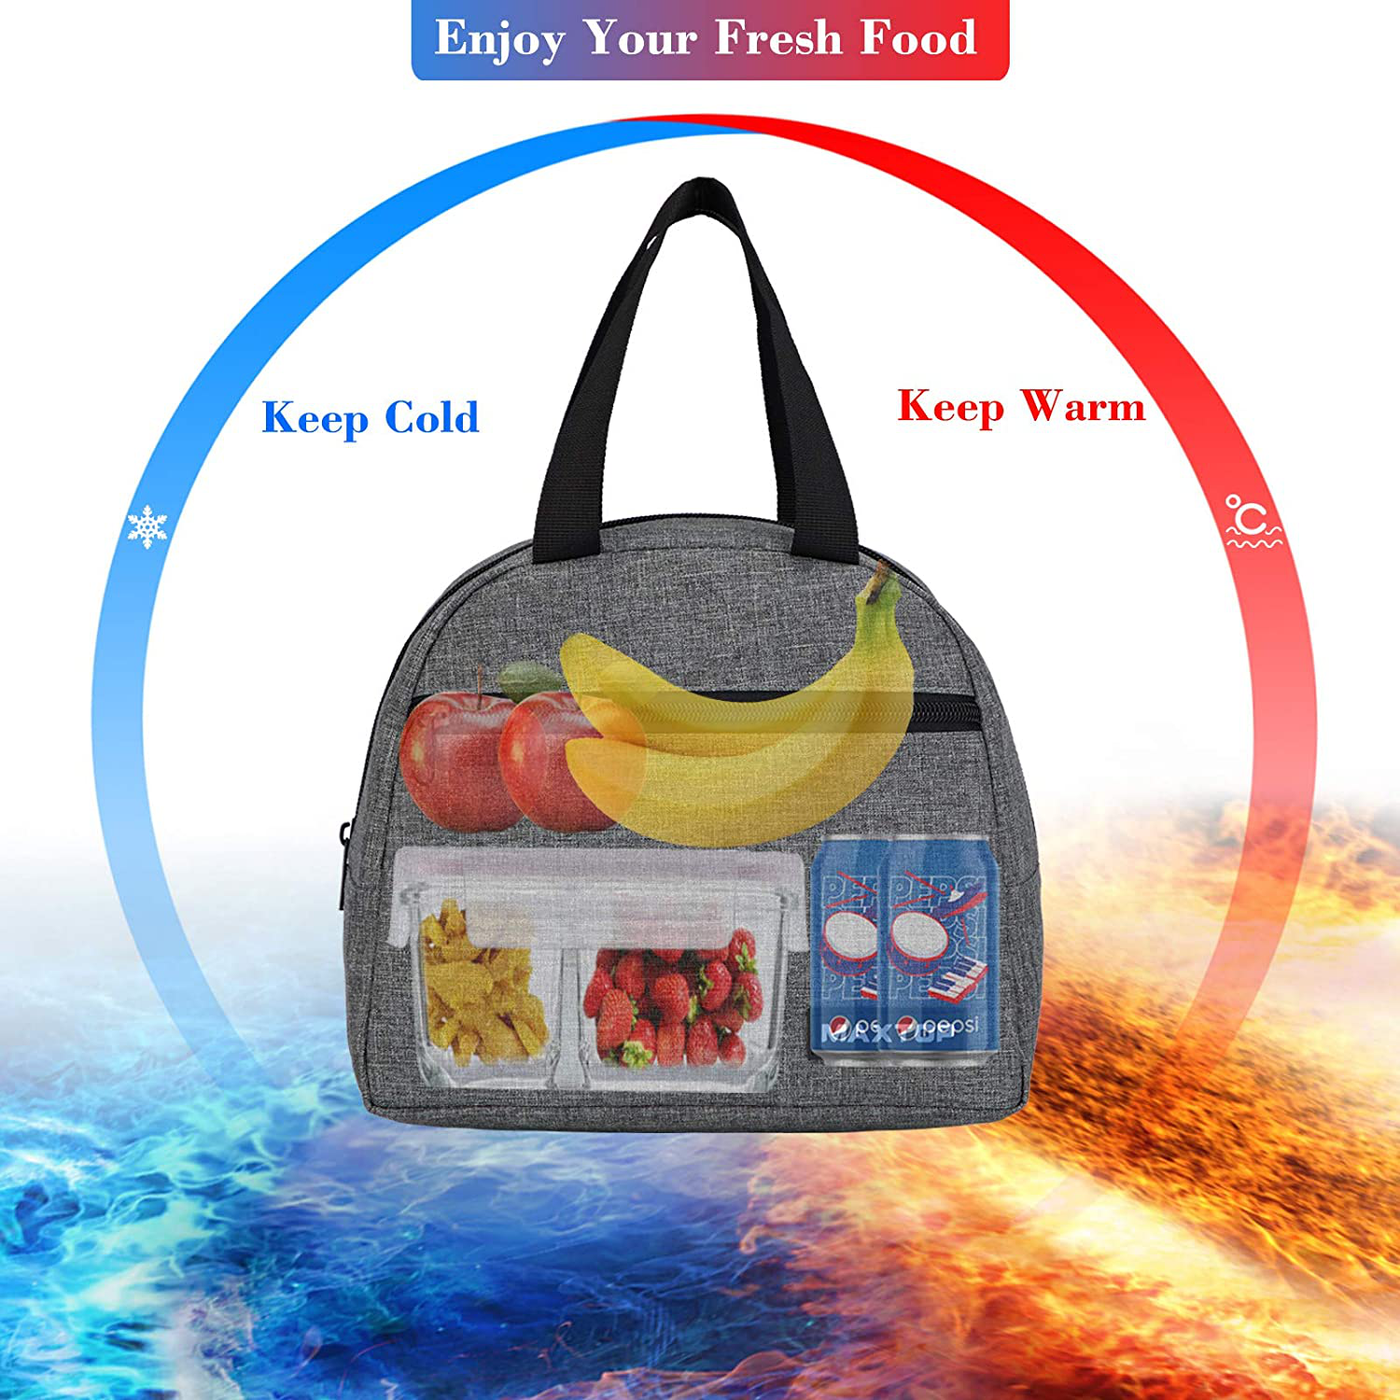 Lunch Bags for Women,Insulated Thermal Lunch Box Bag for Women With Front Pocket and Inner Mesh pocket, Cooler Bag Gifts for Adults Women Men Work College Picnic Beach Park School